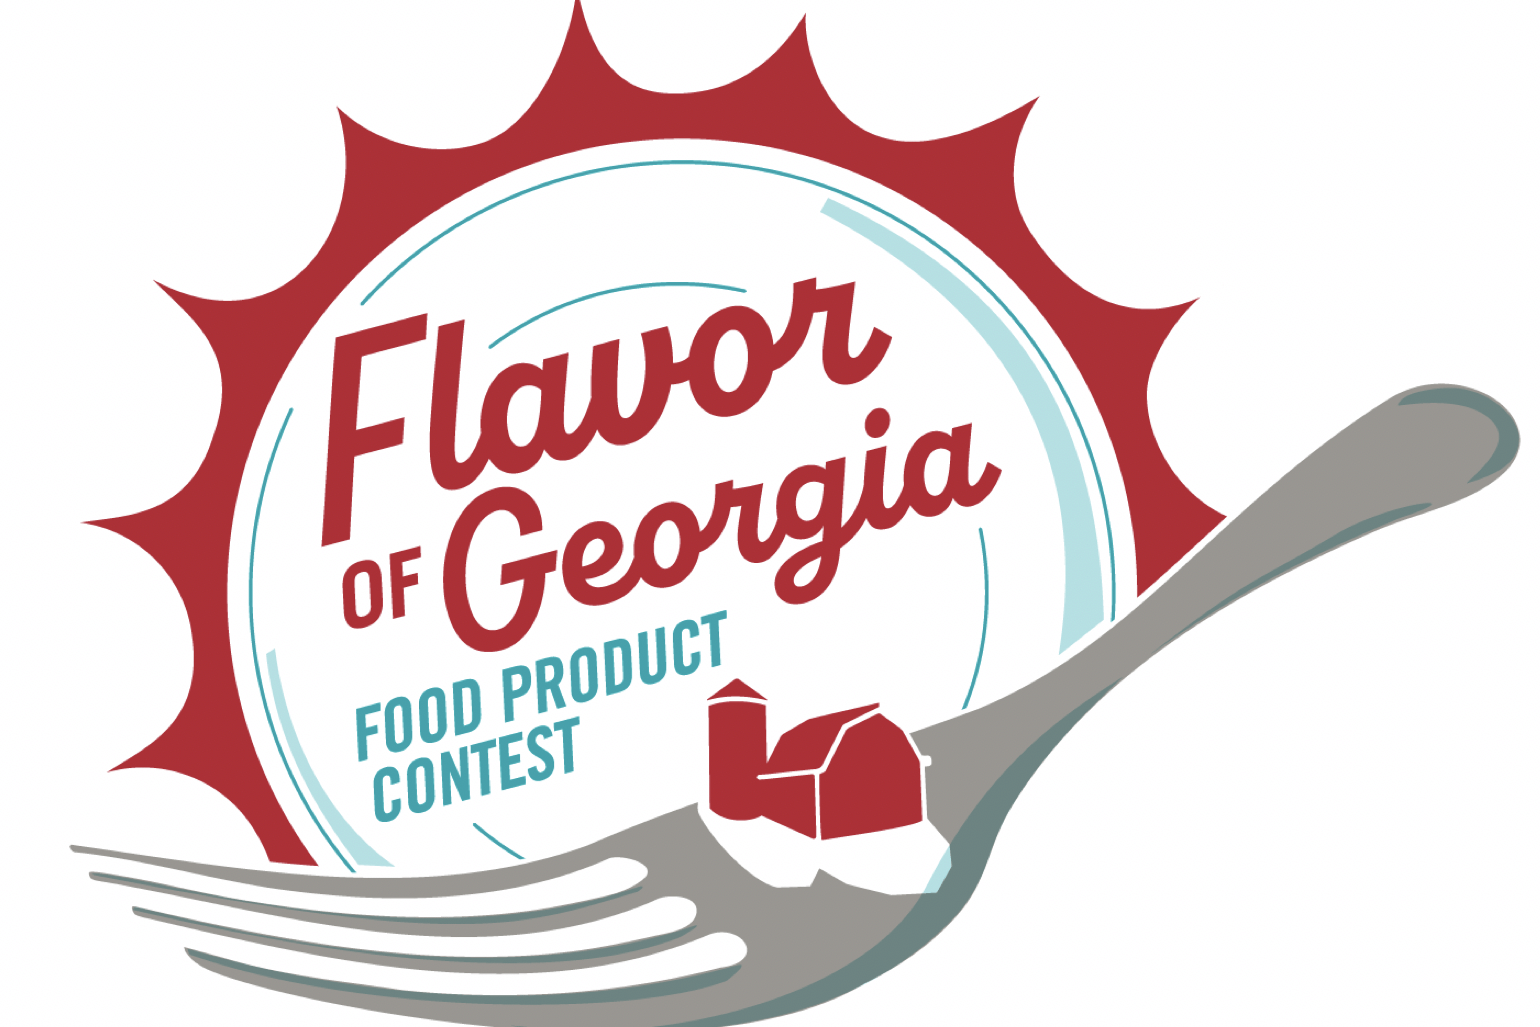 Judges tasted and ranked 148 products in the first round of the Flavor of Georgia competition in mid-March. Thirty-two Georgia products were selected to advance to the final round of judging on April 21 at the Classic Center in Athens.